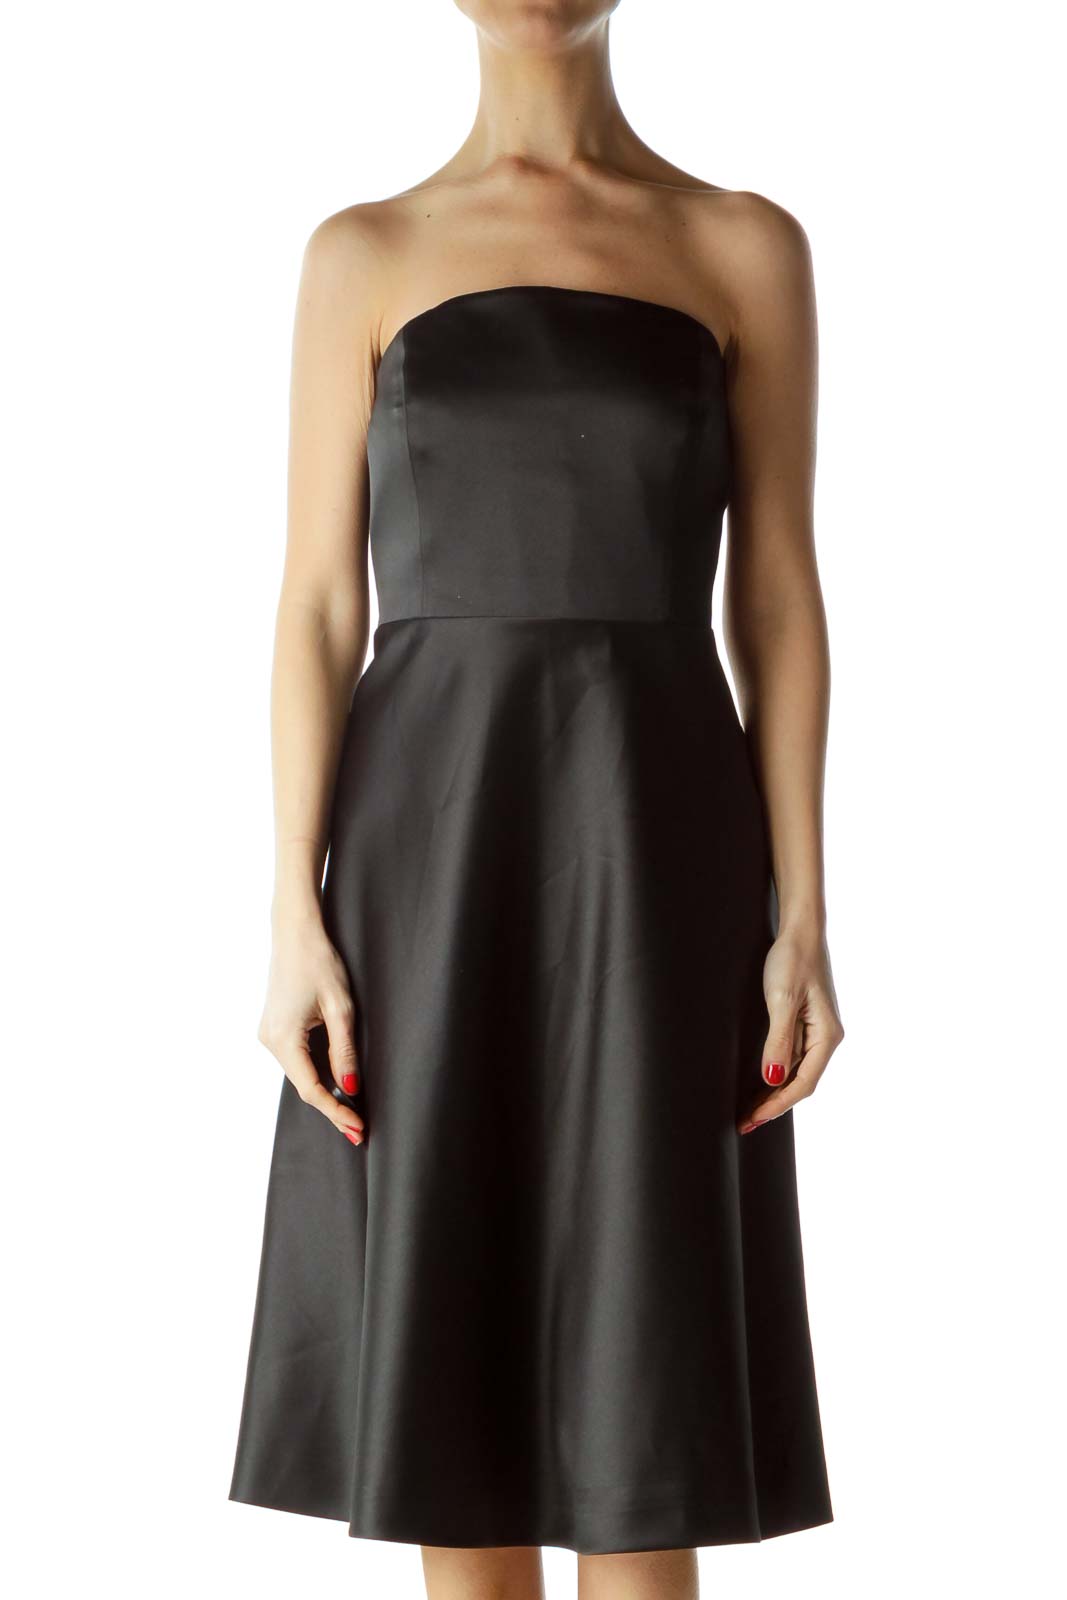 Black Solid Strapless Dress Front